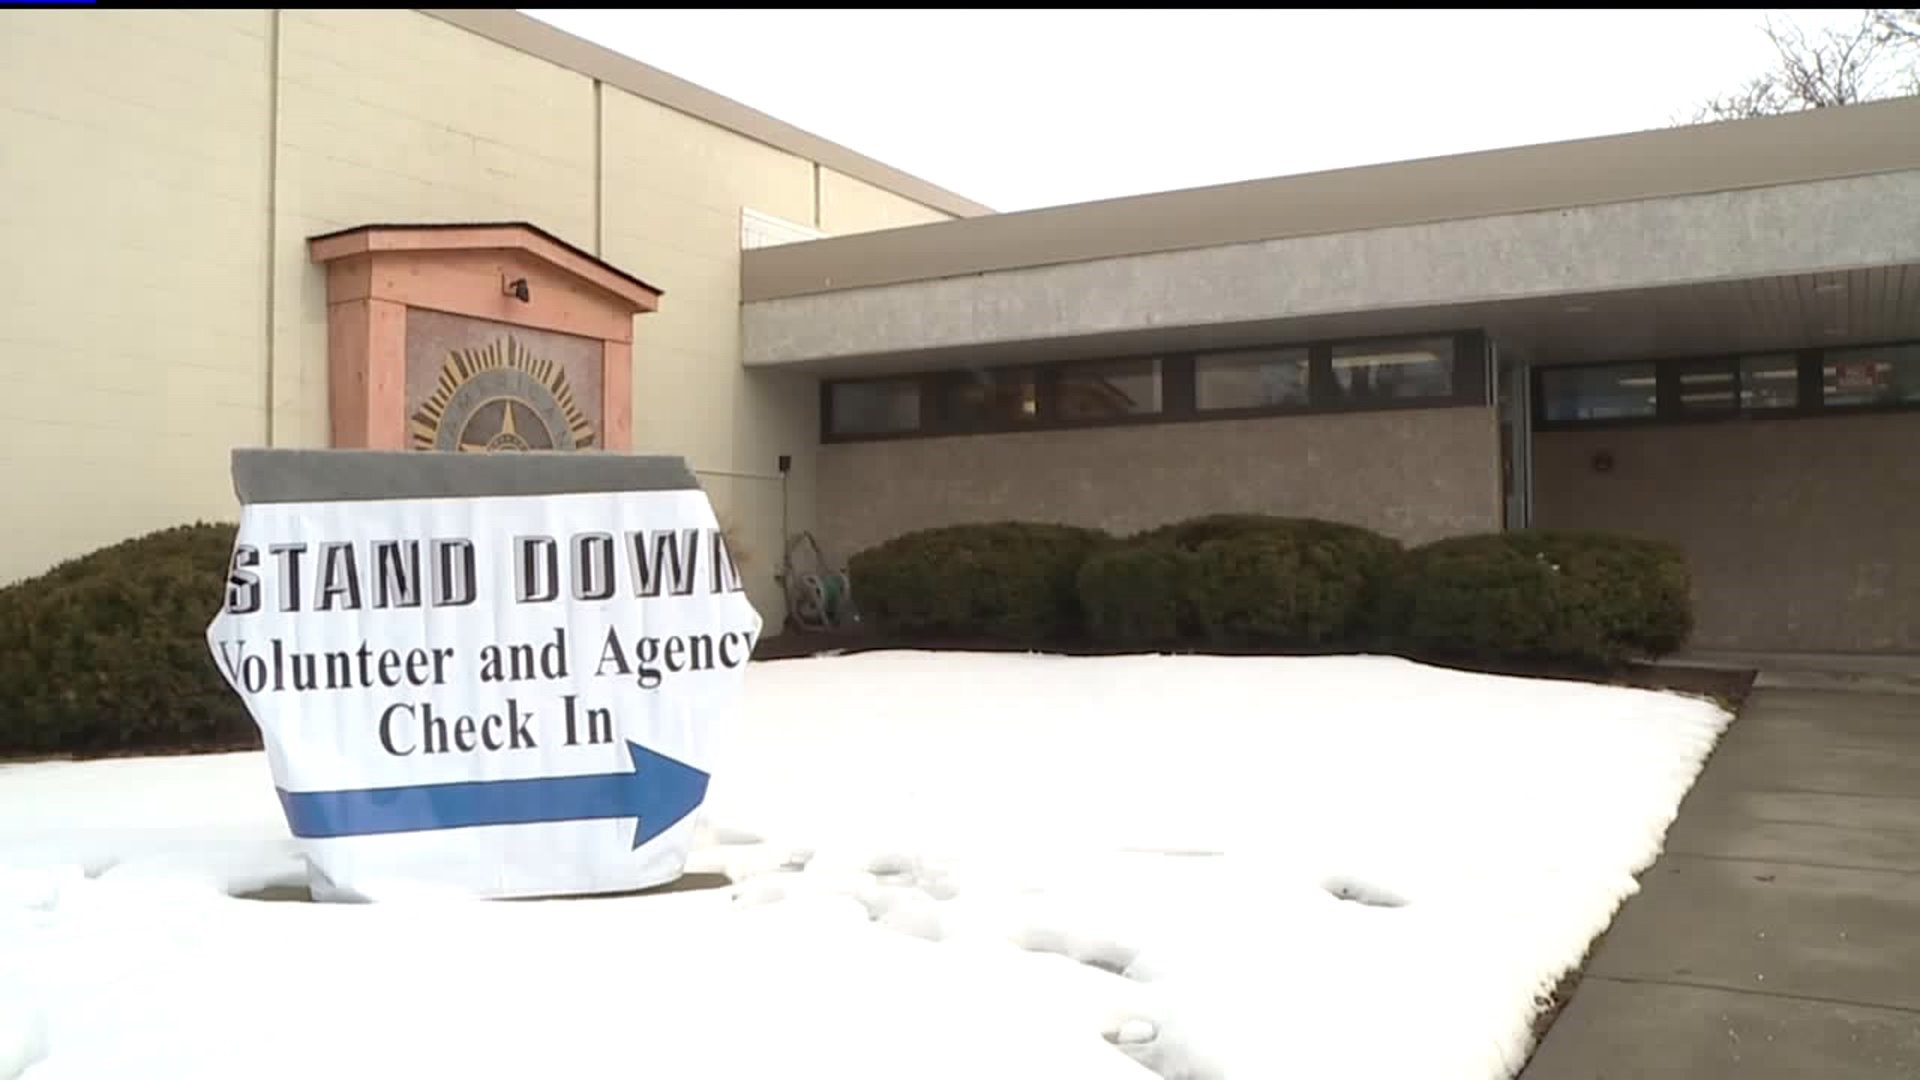 Stand down event held in Davenport